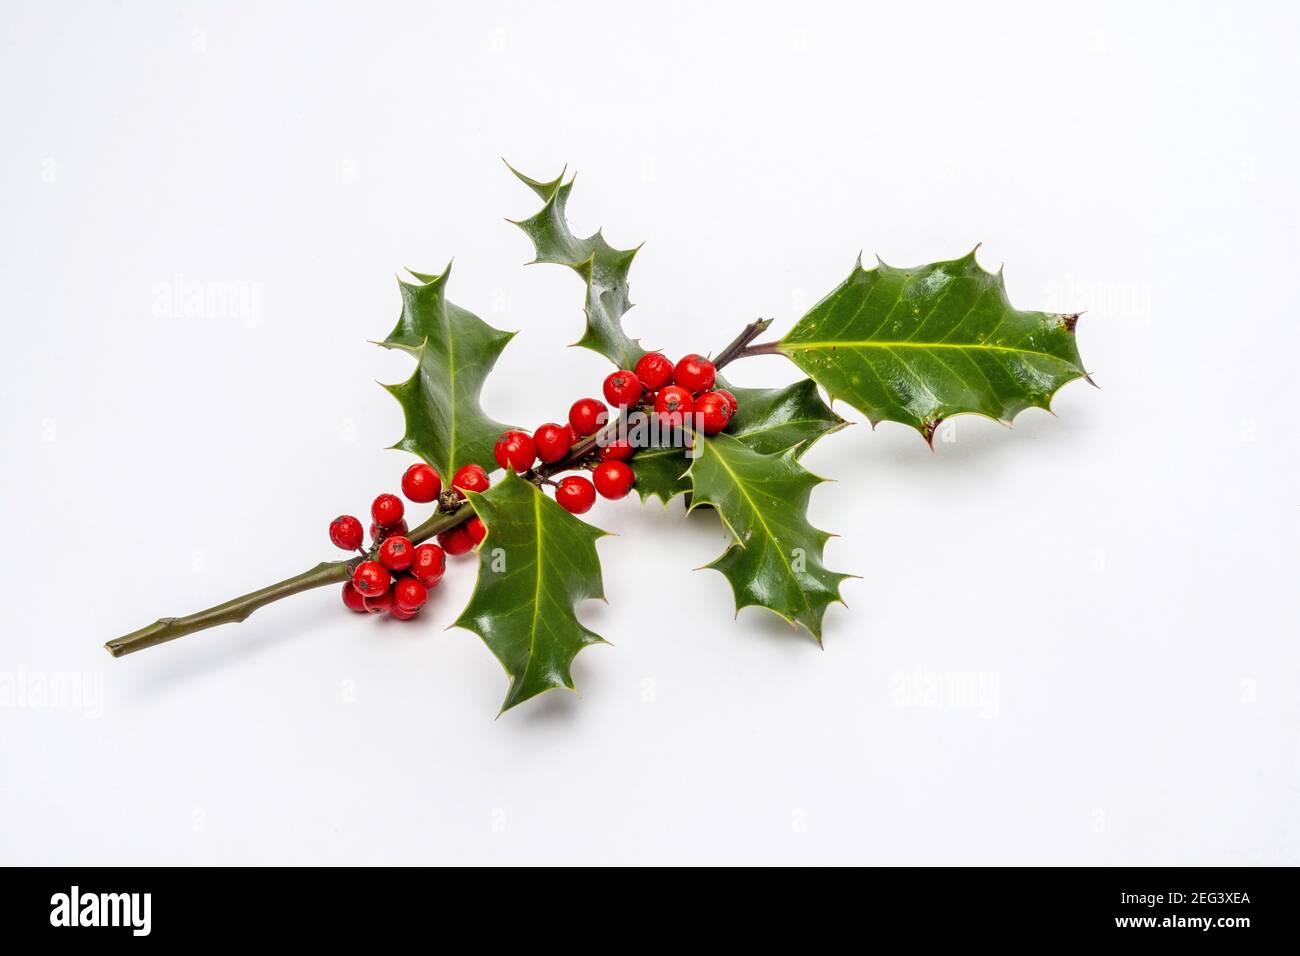 Christmas holly plant branch decoration with ripe red berries